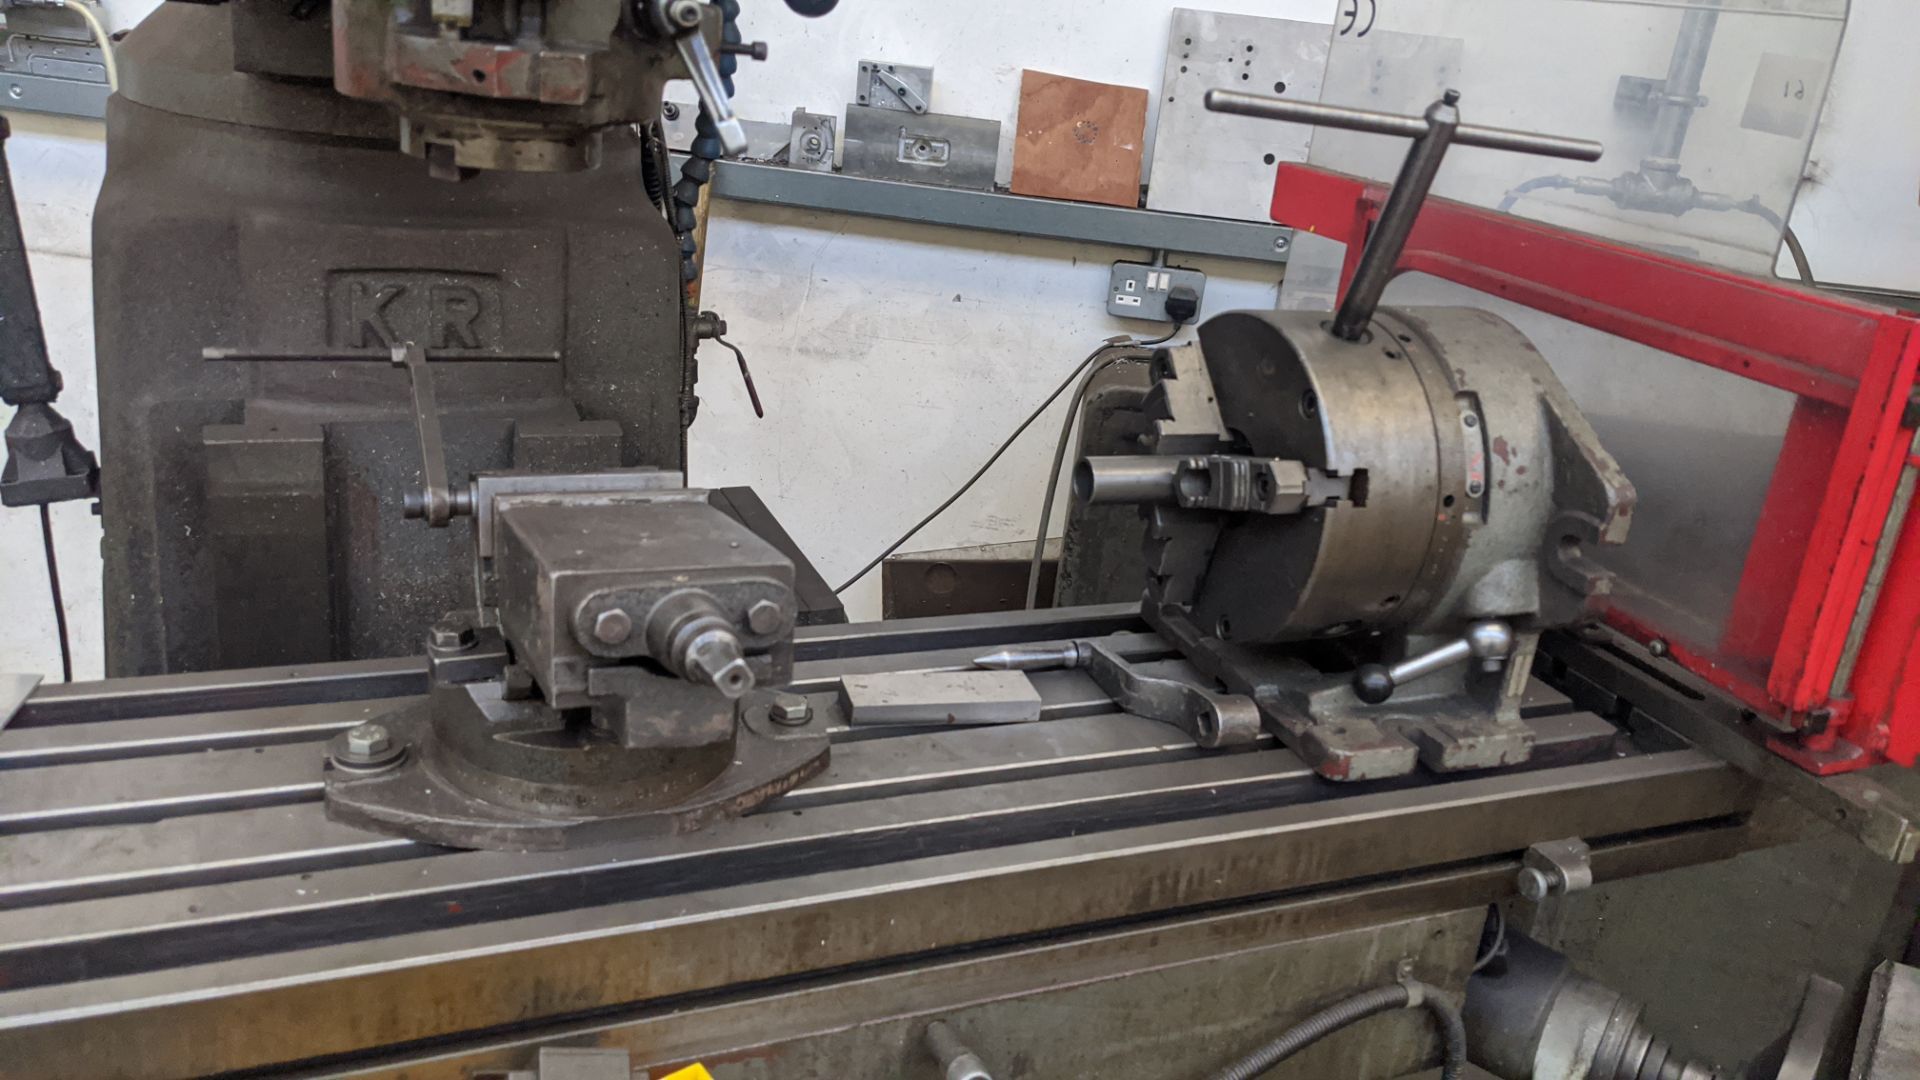 King Rich KRV3000-SLV milling machine with Newall DP700 controller including tooling/ancillary items - Image 7 of 15